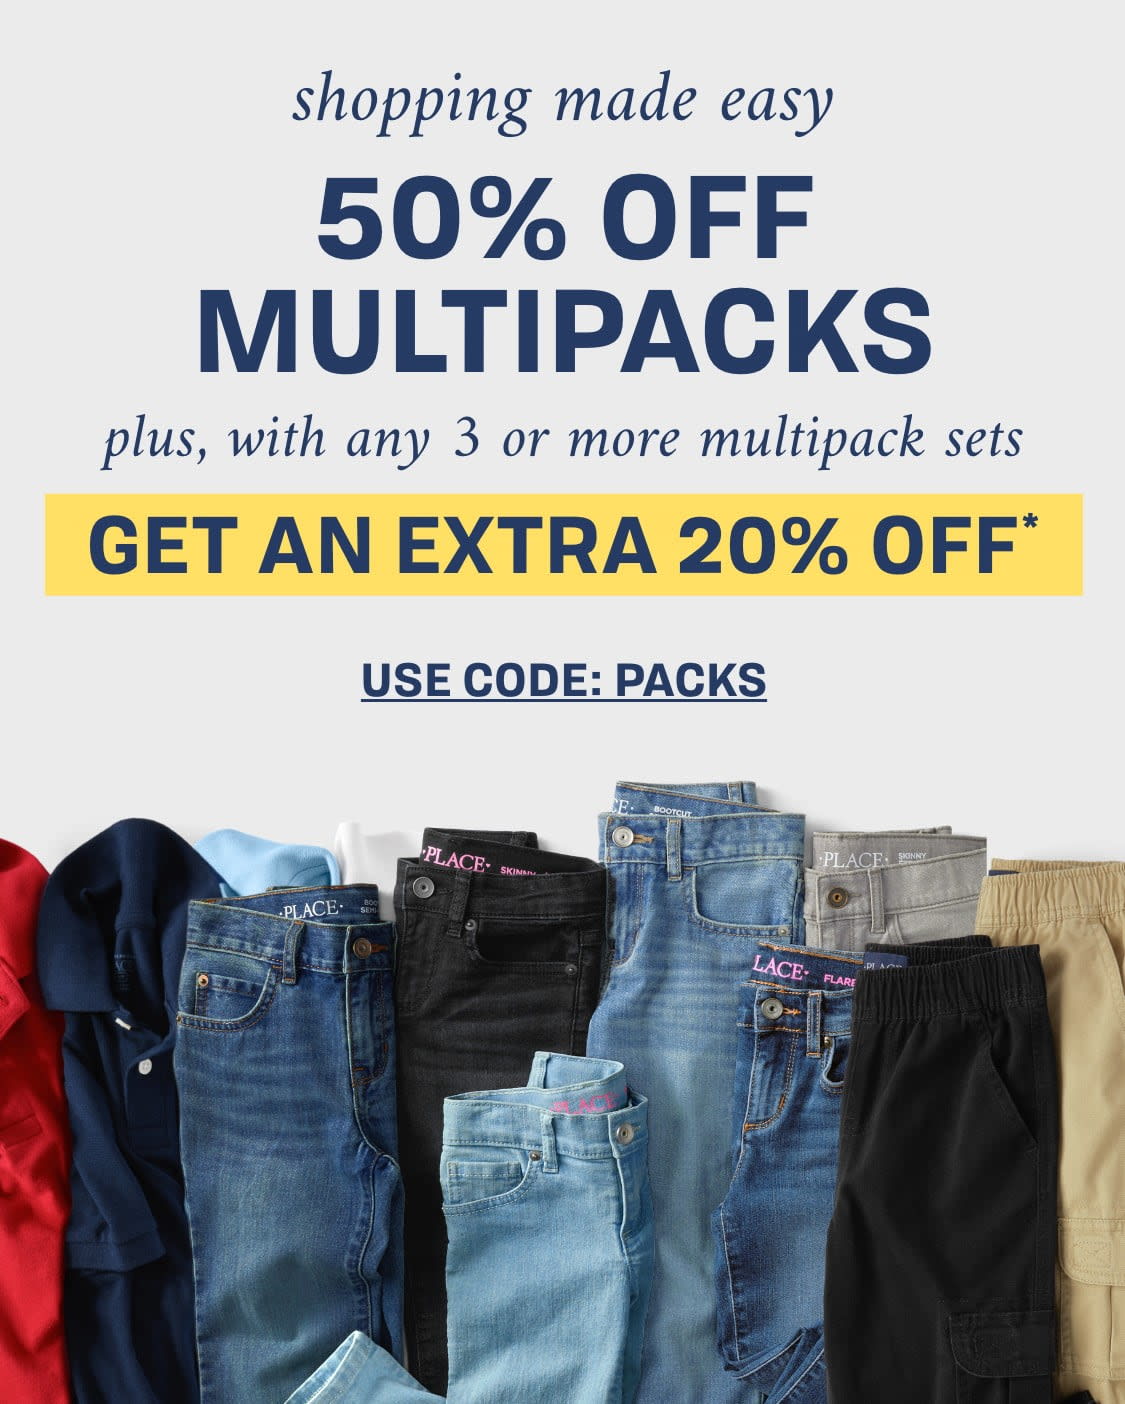 Shopping made easy 50% off multipacks plus, with any 3 or more multipack sets get an extra 20% off 3+ multipacks